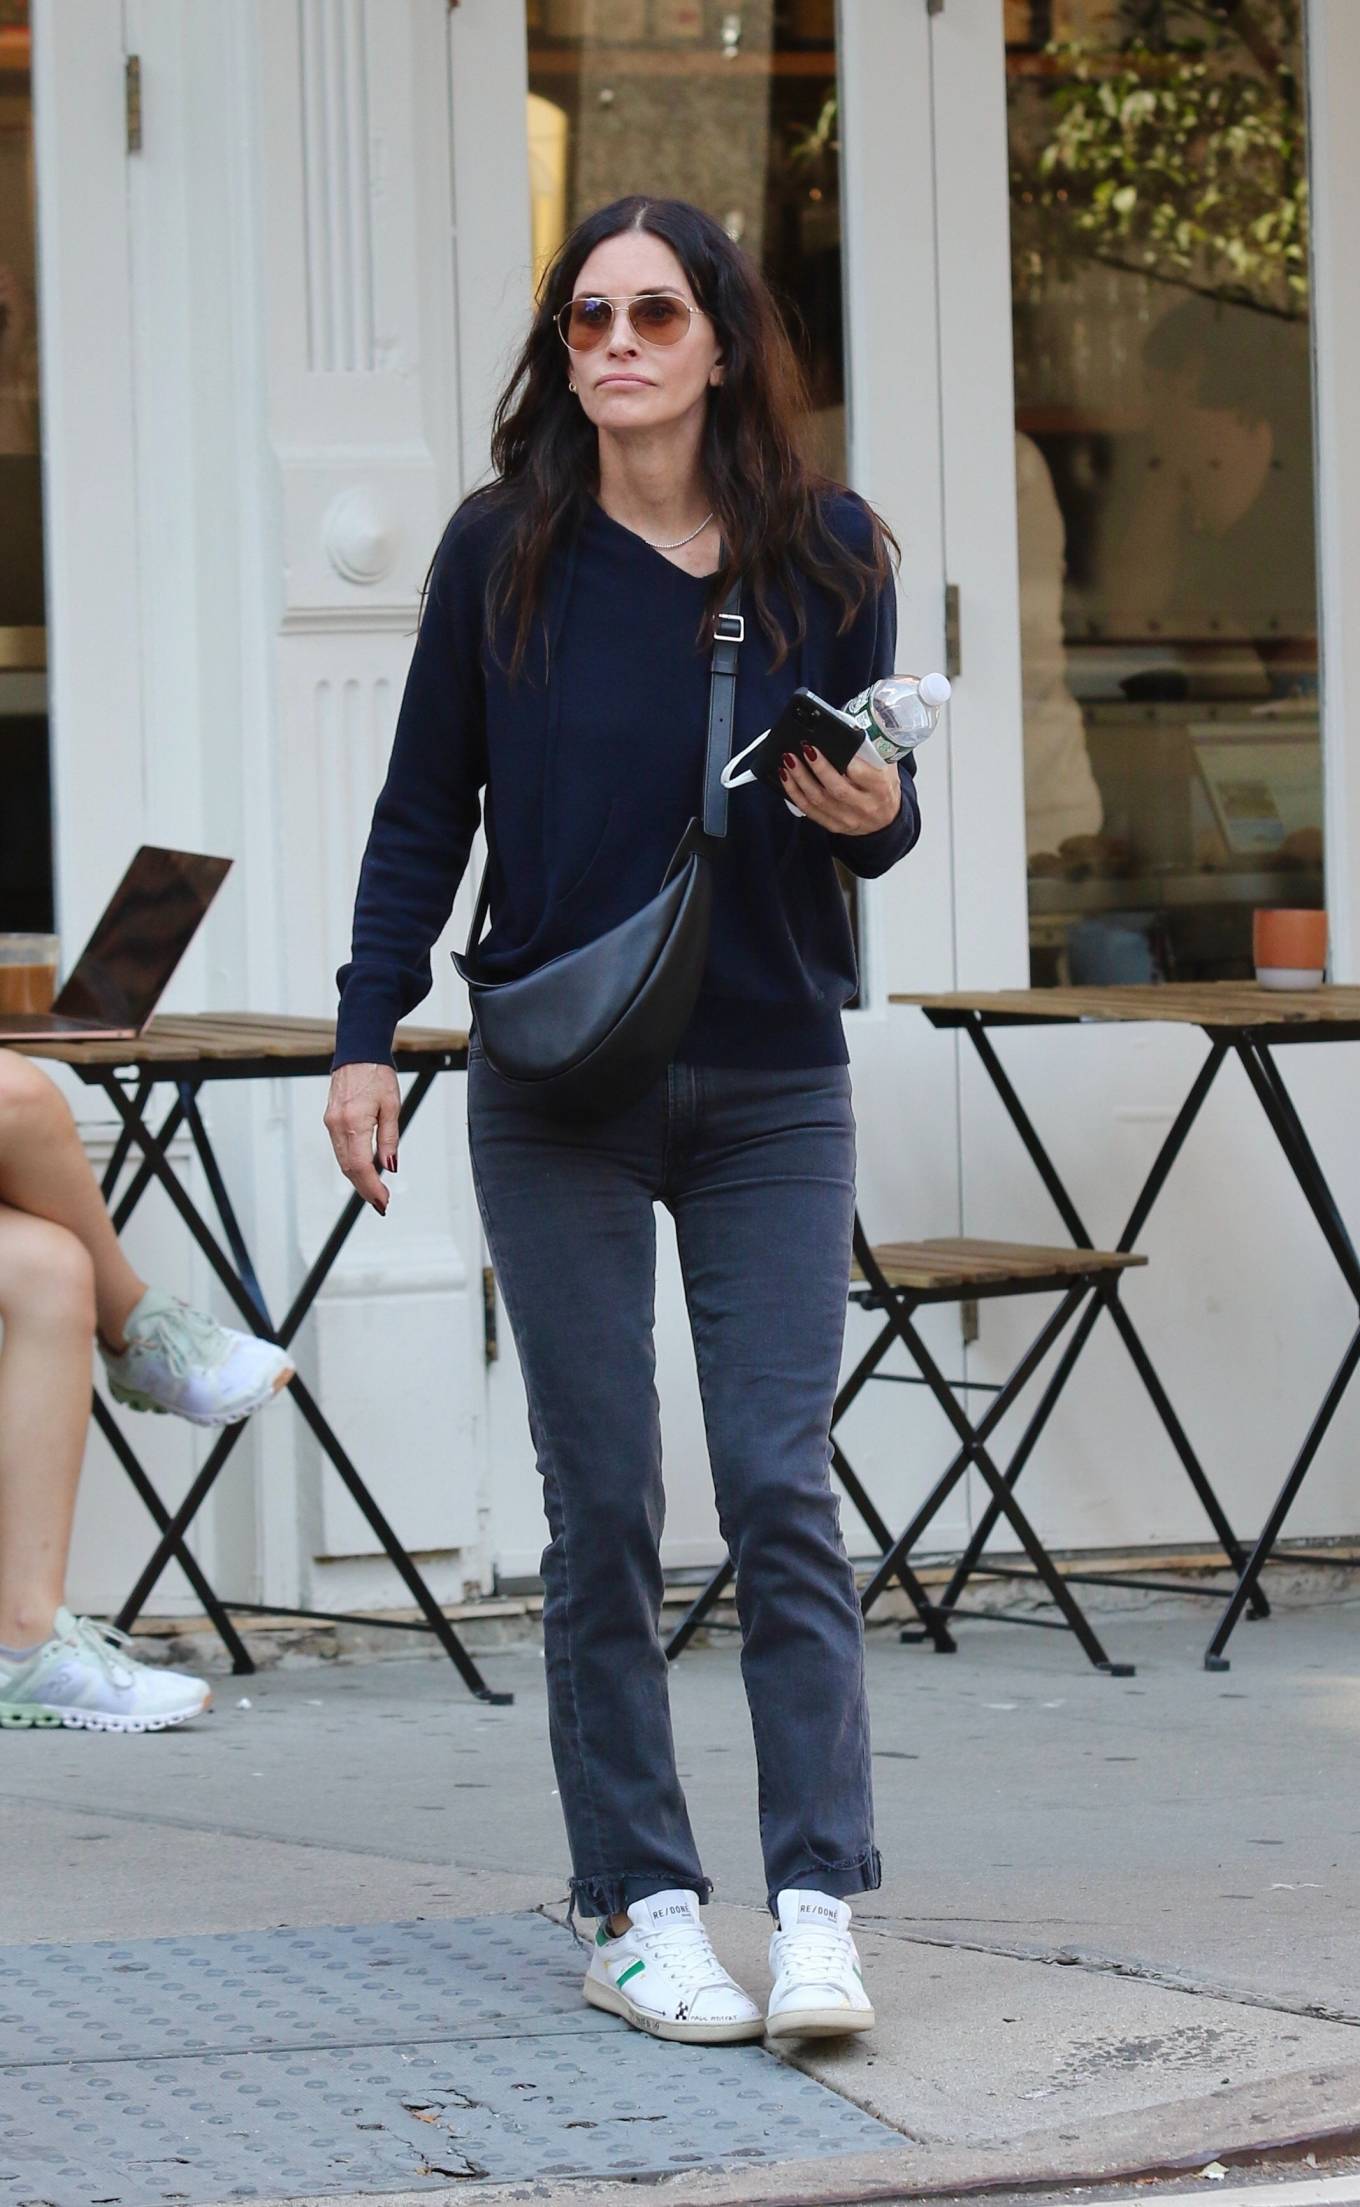 Courteney Cox 2021 : Courteney Cox – Steps out for lunch with friends in New York City-11